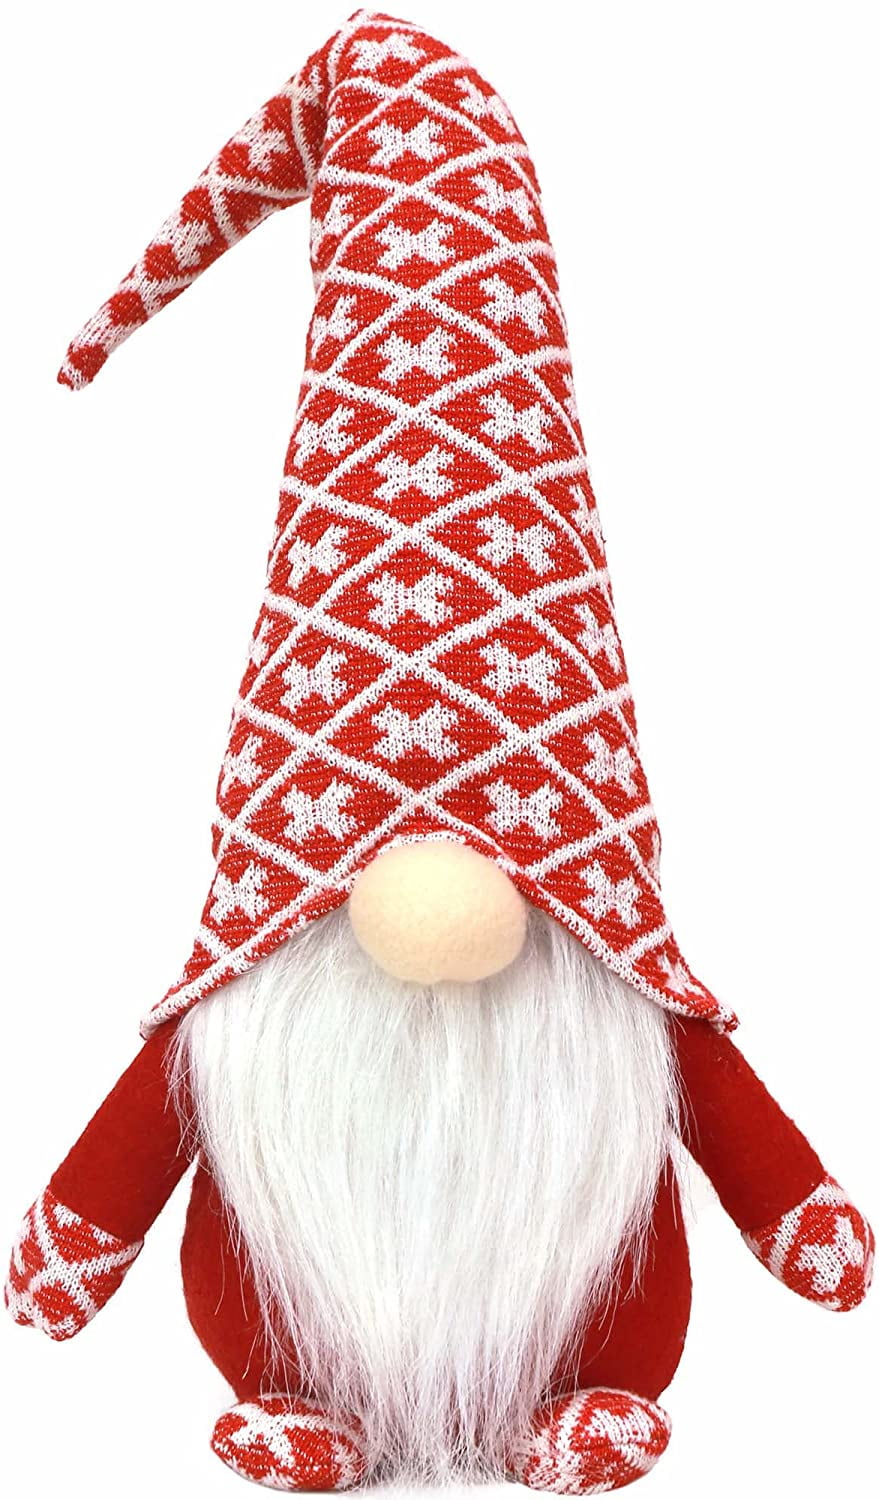 Christmas Swedish Gnome Plush Decorations Handmade Tomte 19 Inches Home Holiday 